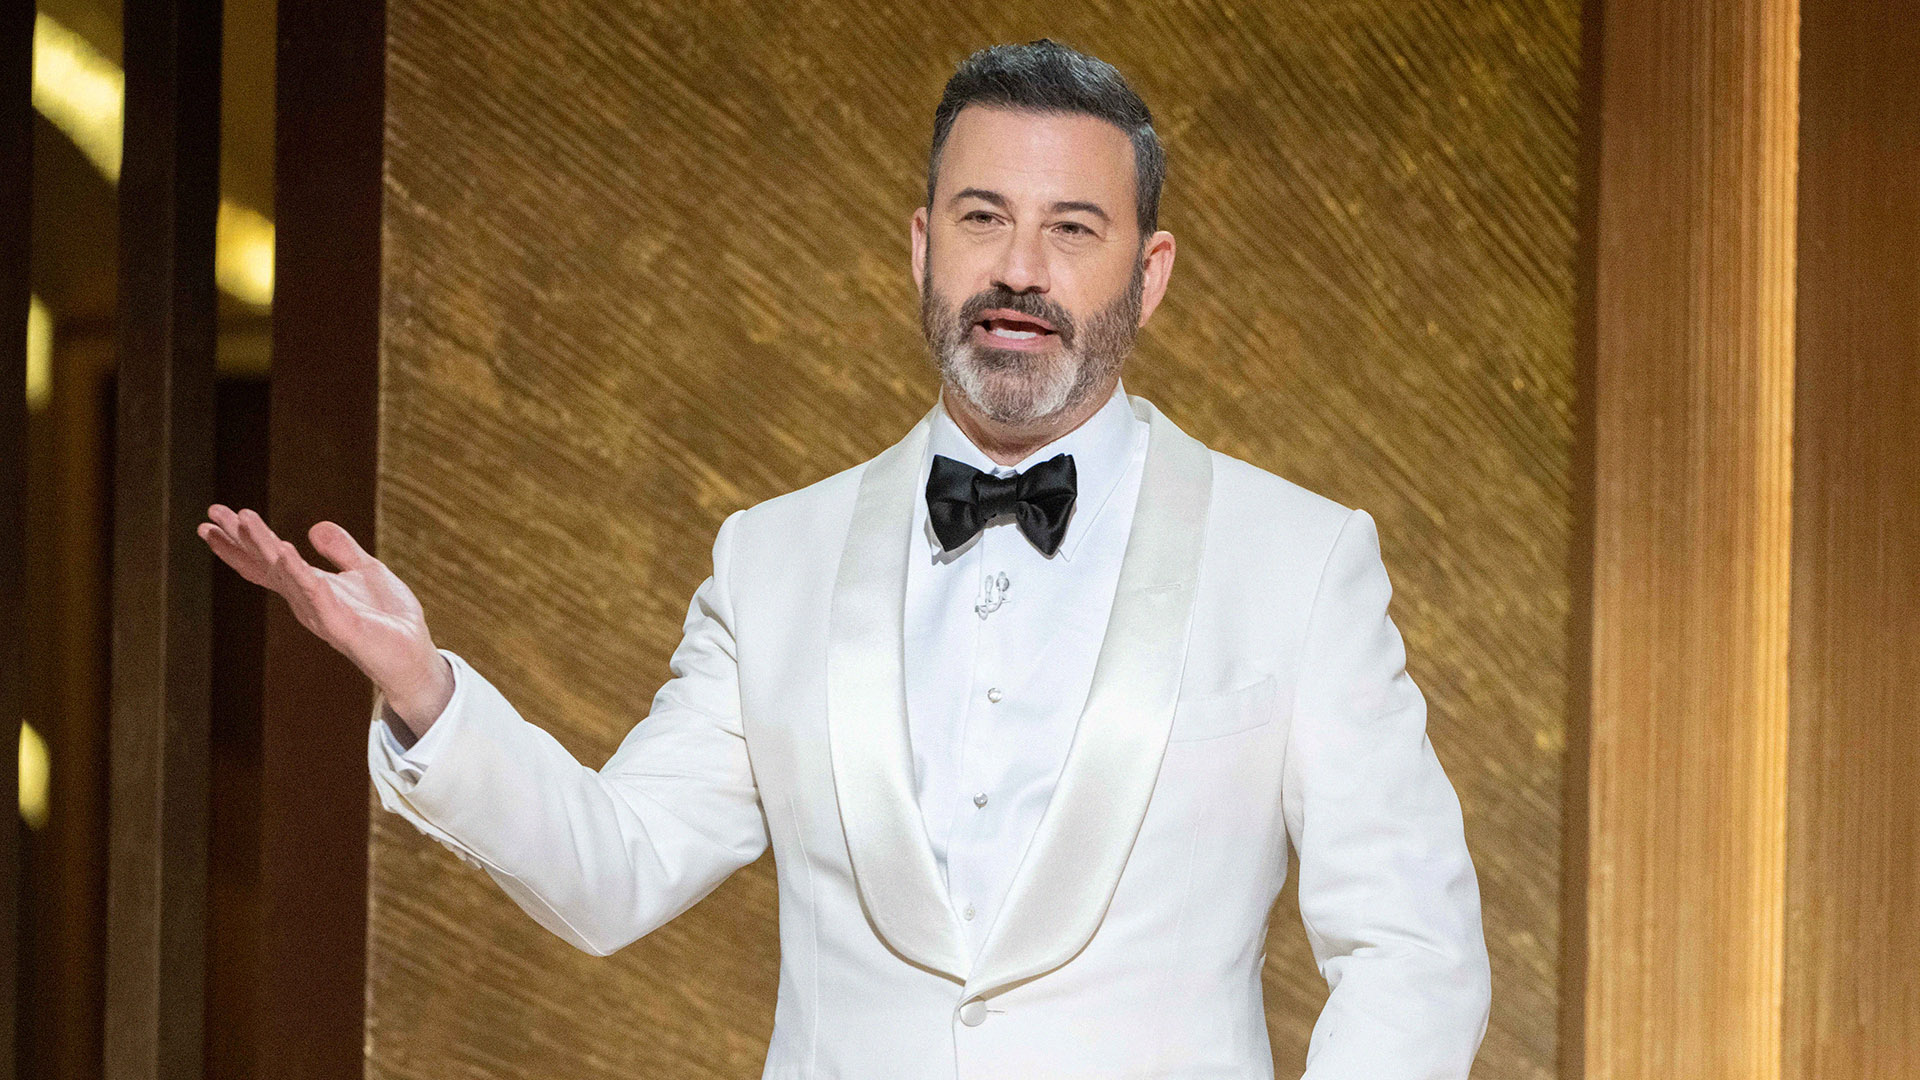 Has Hollywood Run Out of Comedians? Jimmy Kimmel Is Set to Host Oscars for 4th Time